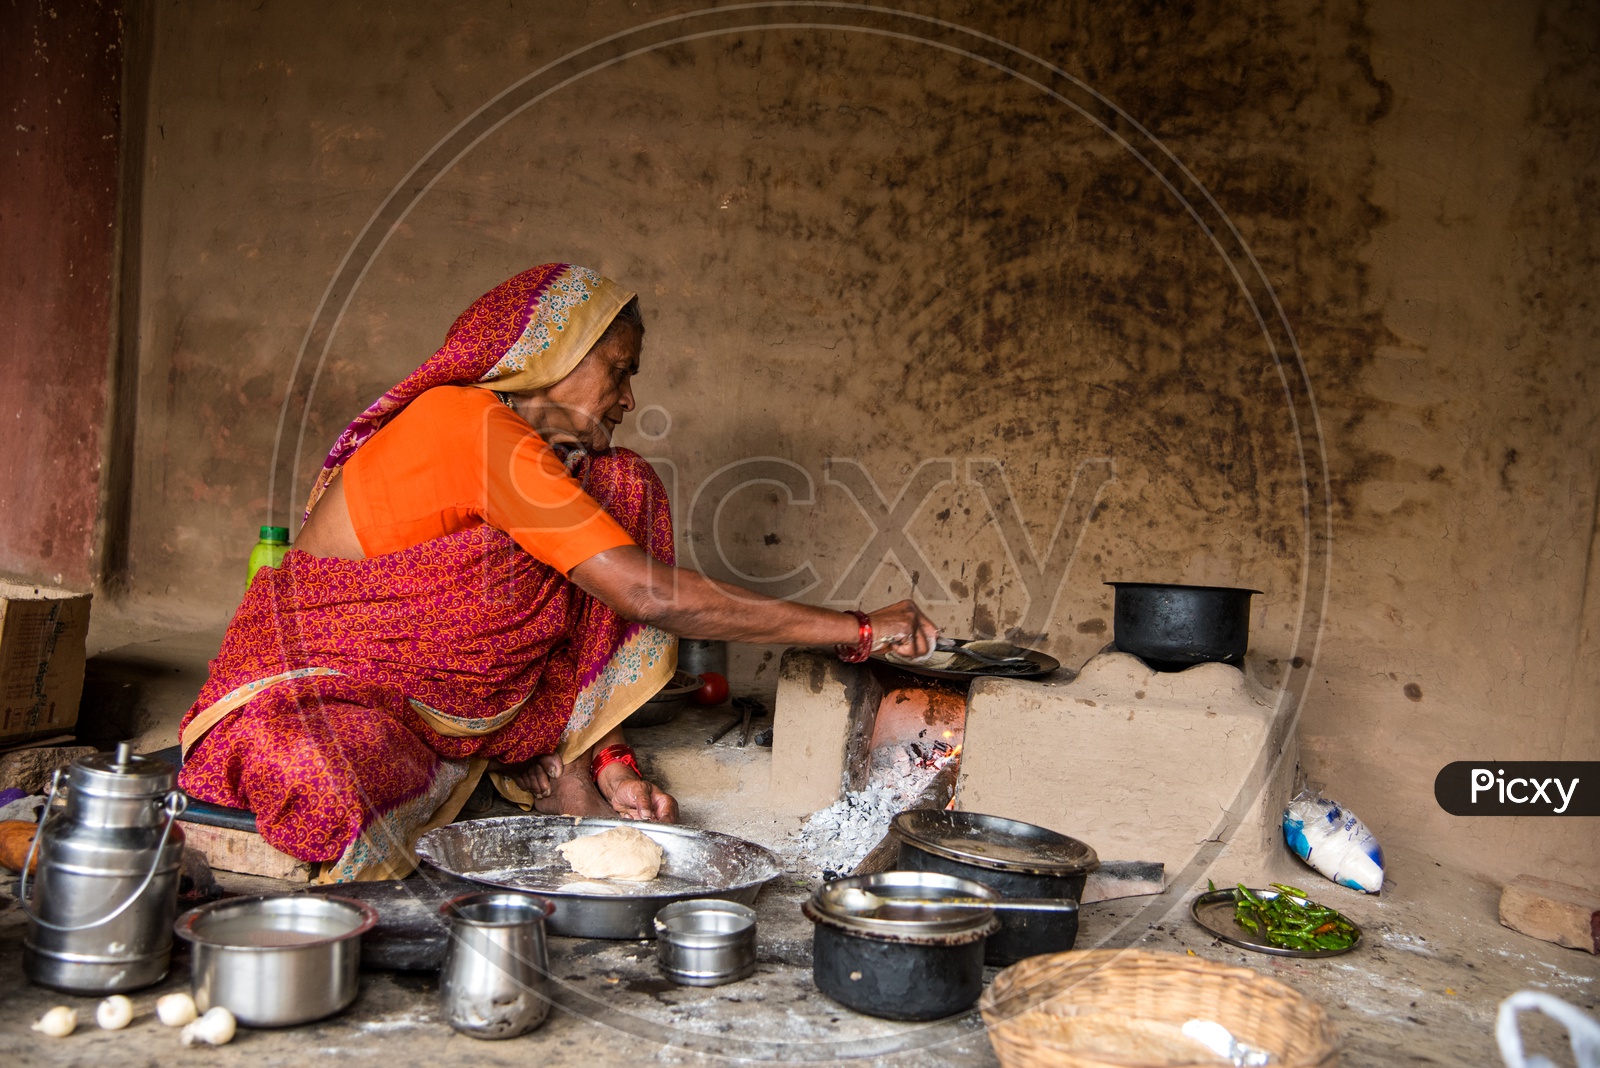 Image Of An Indian Old Woman Making Or Cooking Food In An Ancient Or Old Kitchen With Earthen